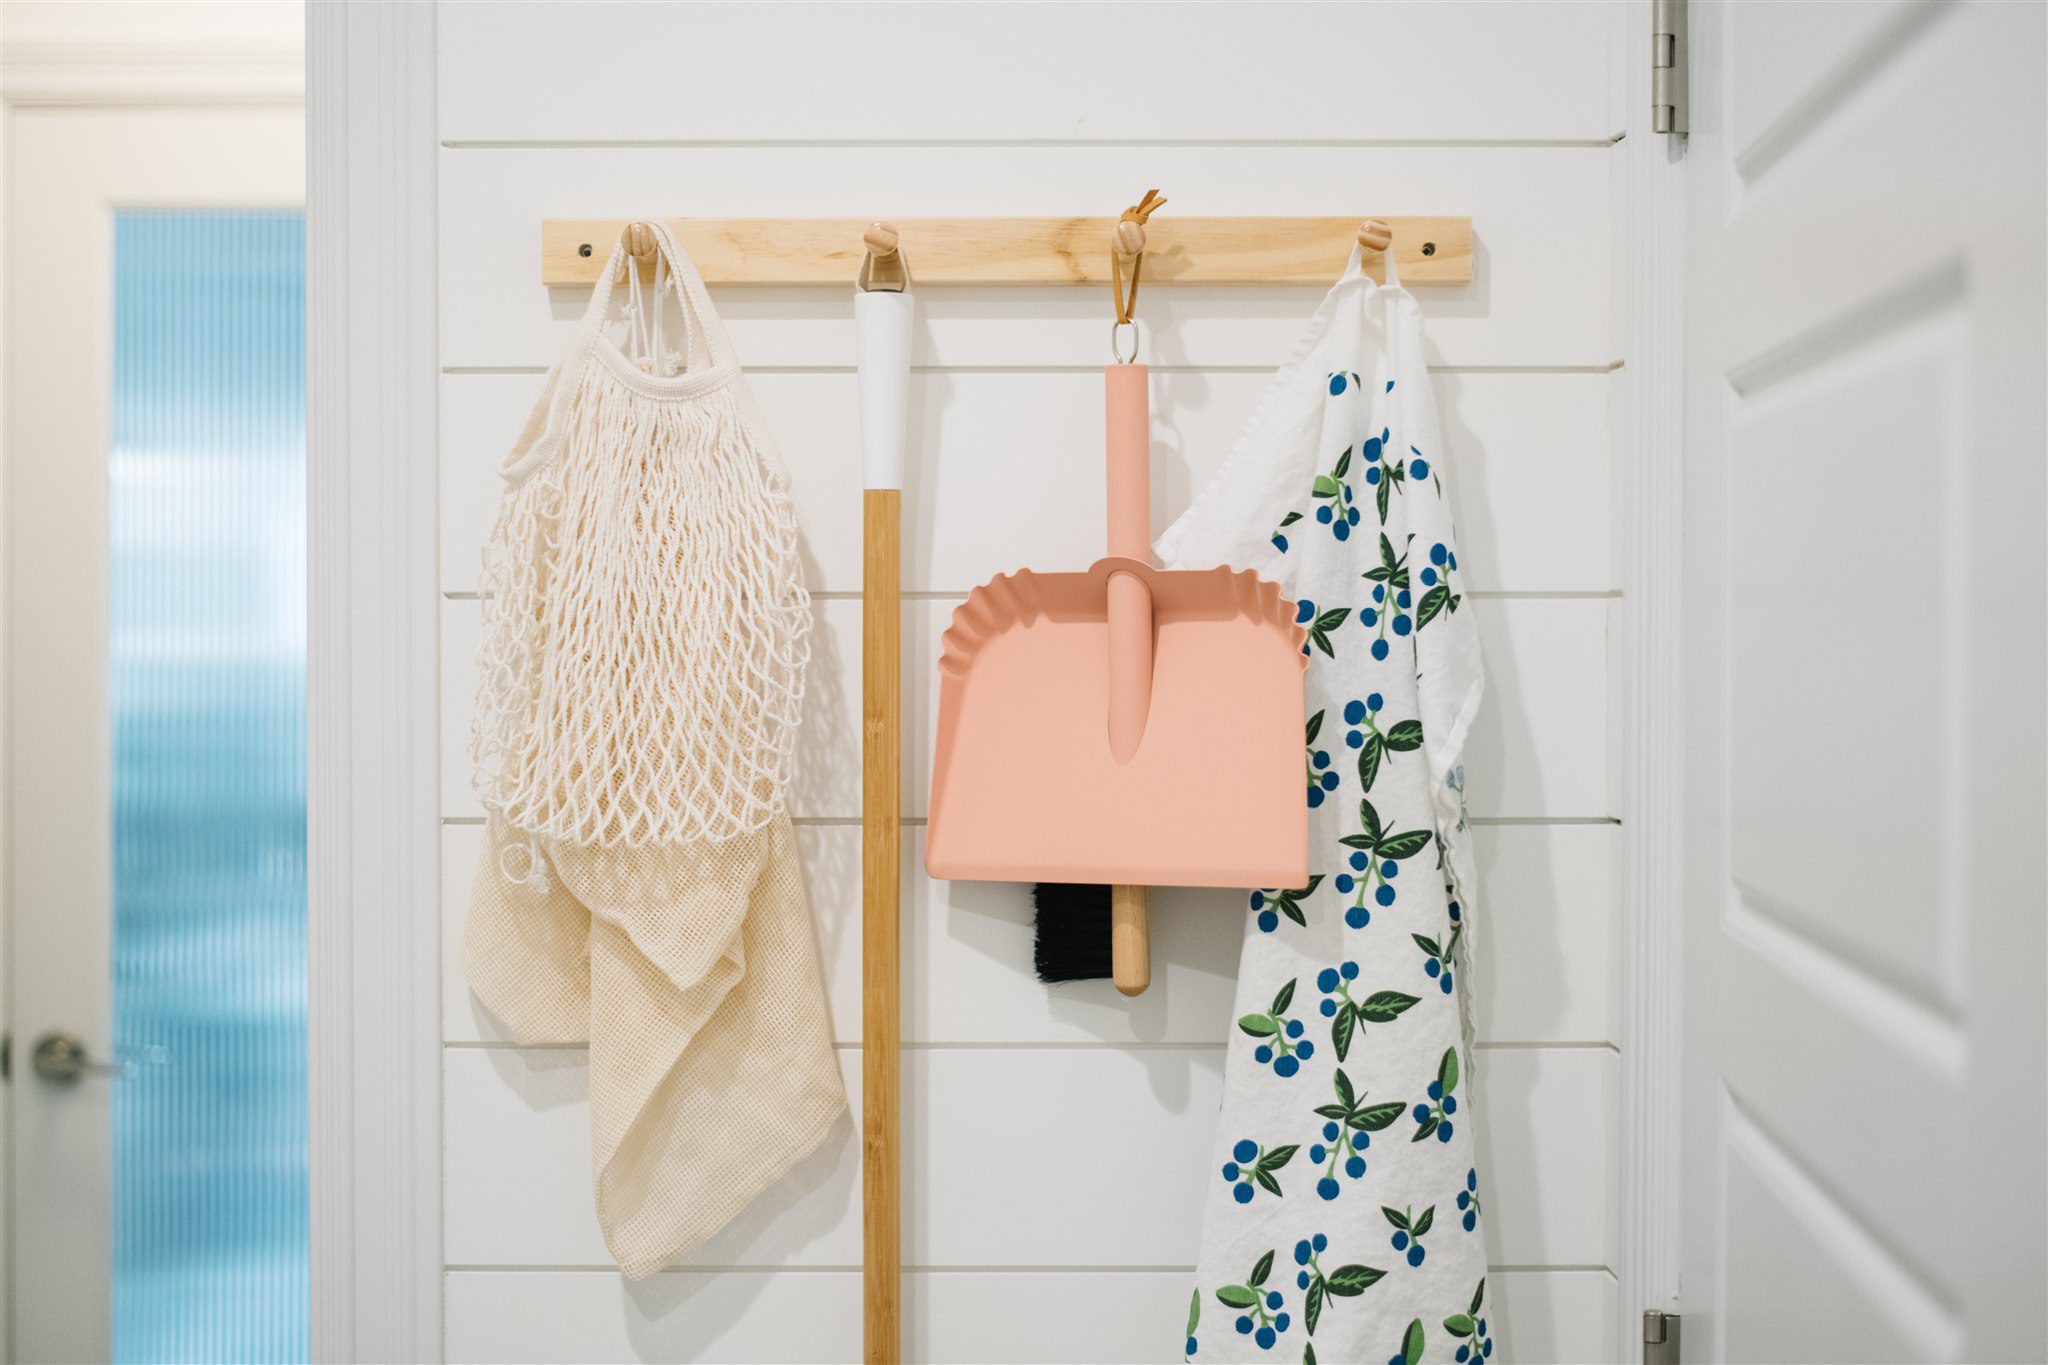 peg rail with dustpan, tea towel and market bags hung on it